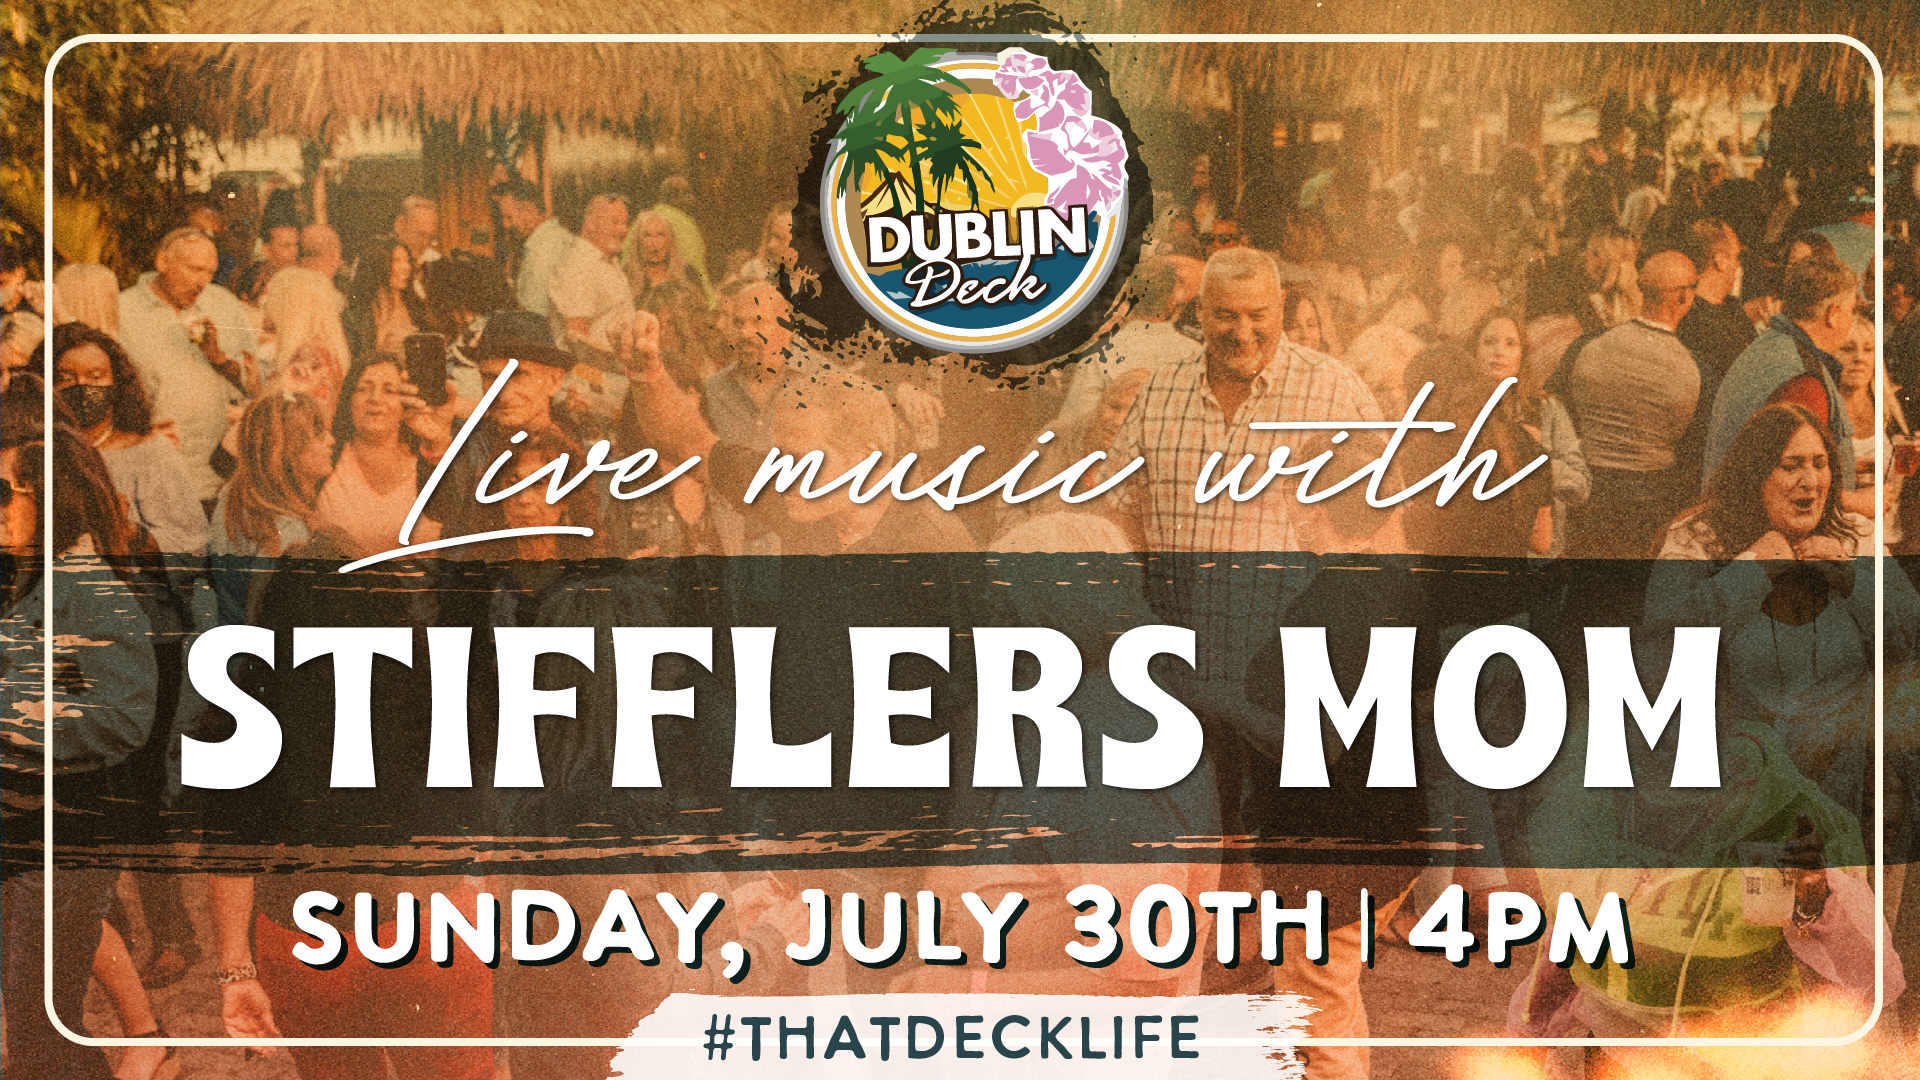 End the weekend off with Stiffler's Mom rockin' the stage! Music starts at 4PM